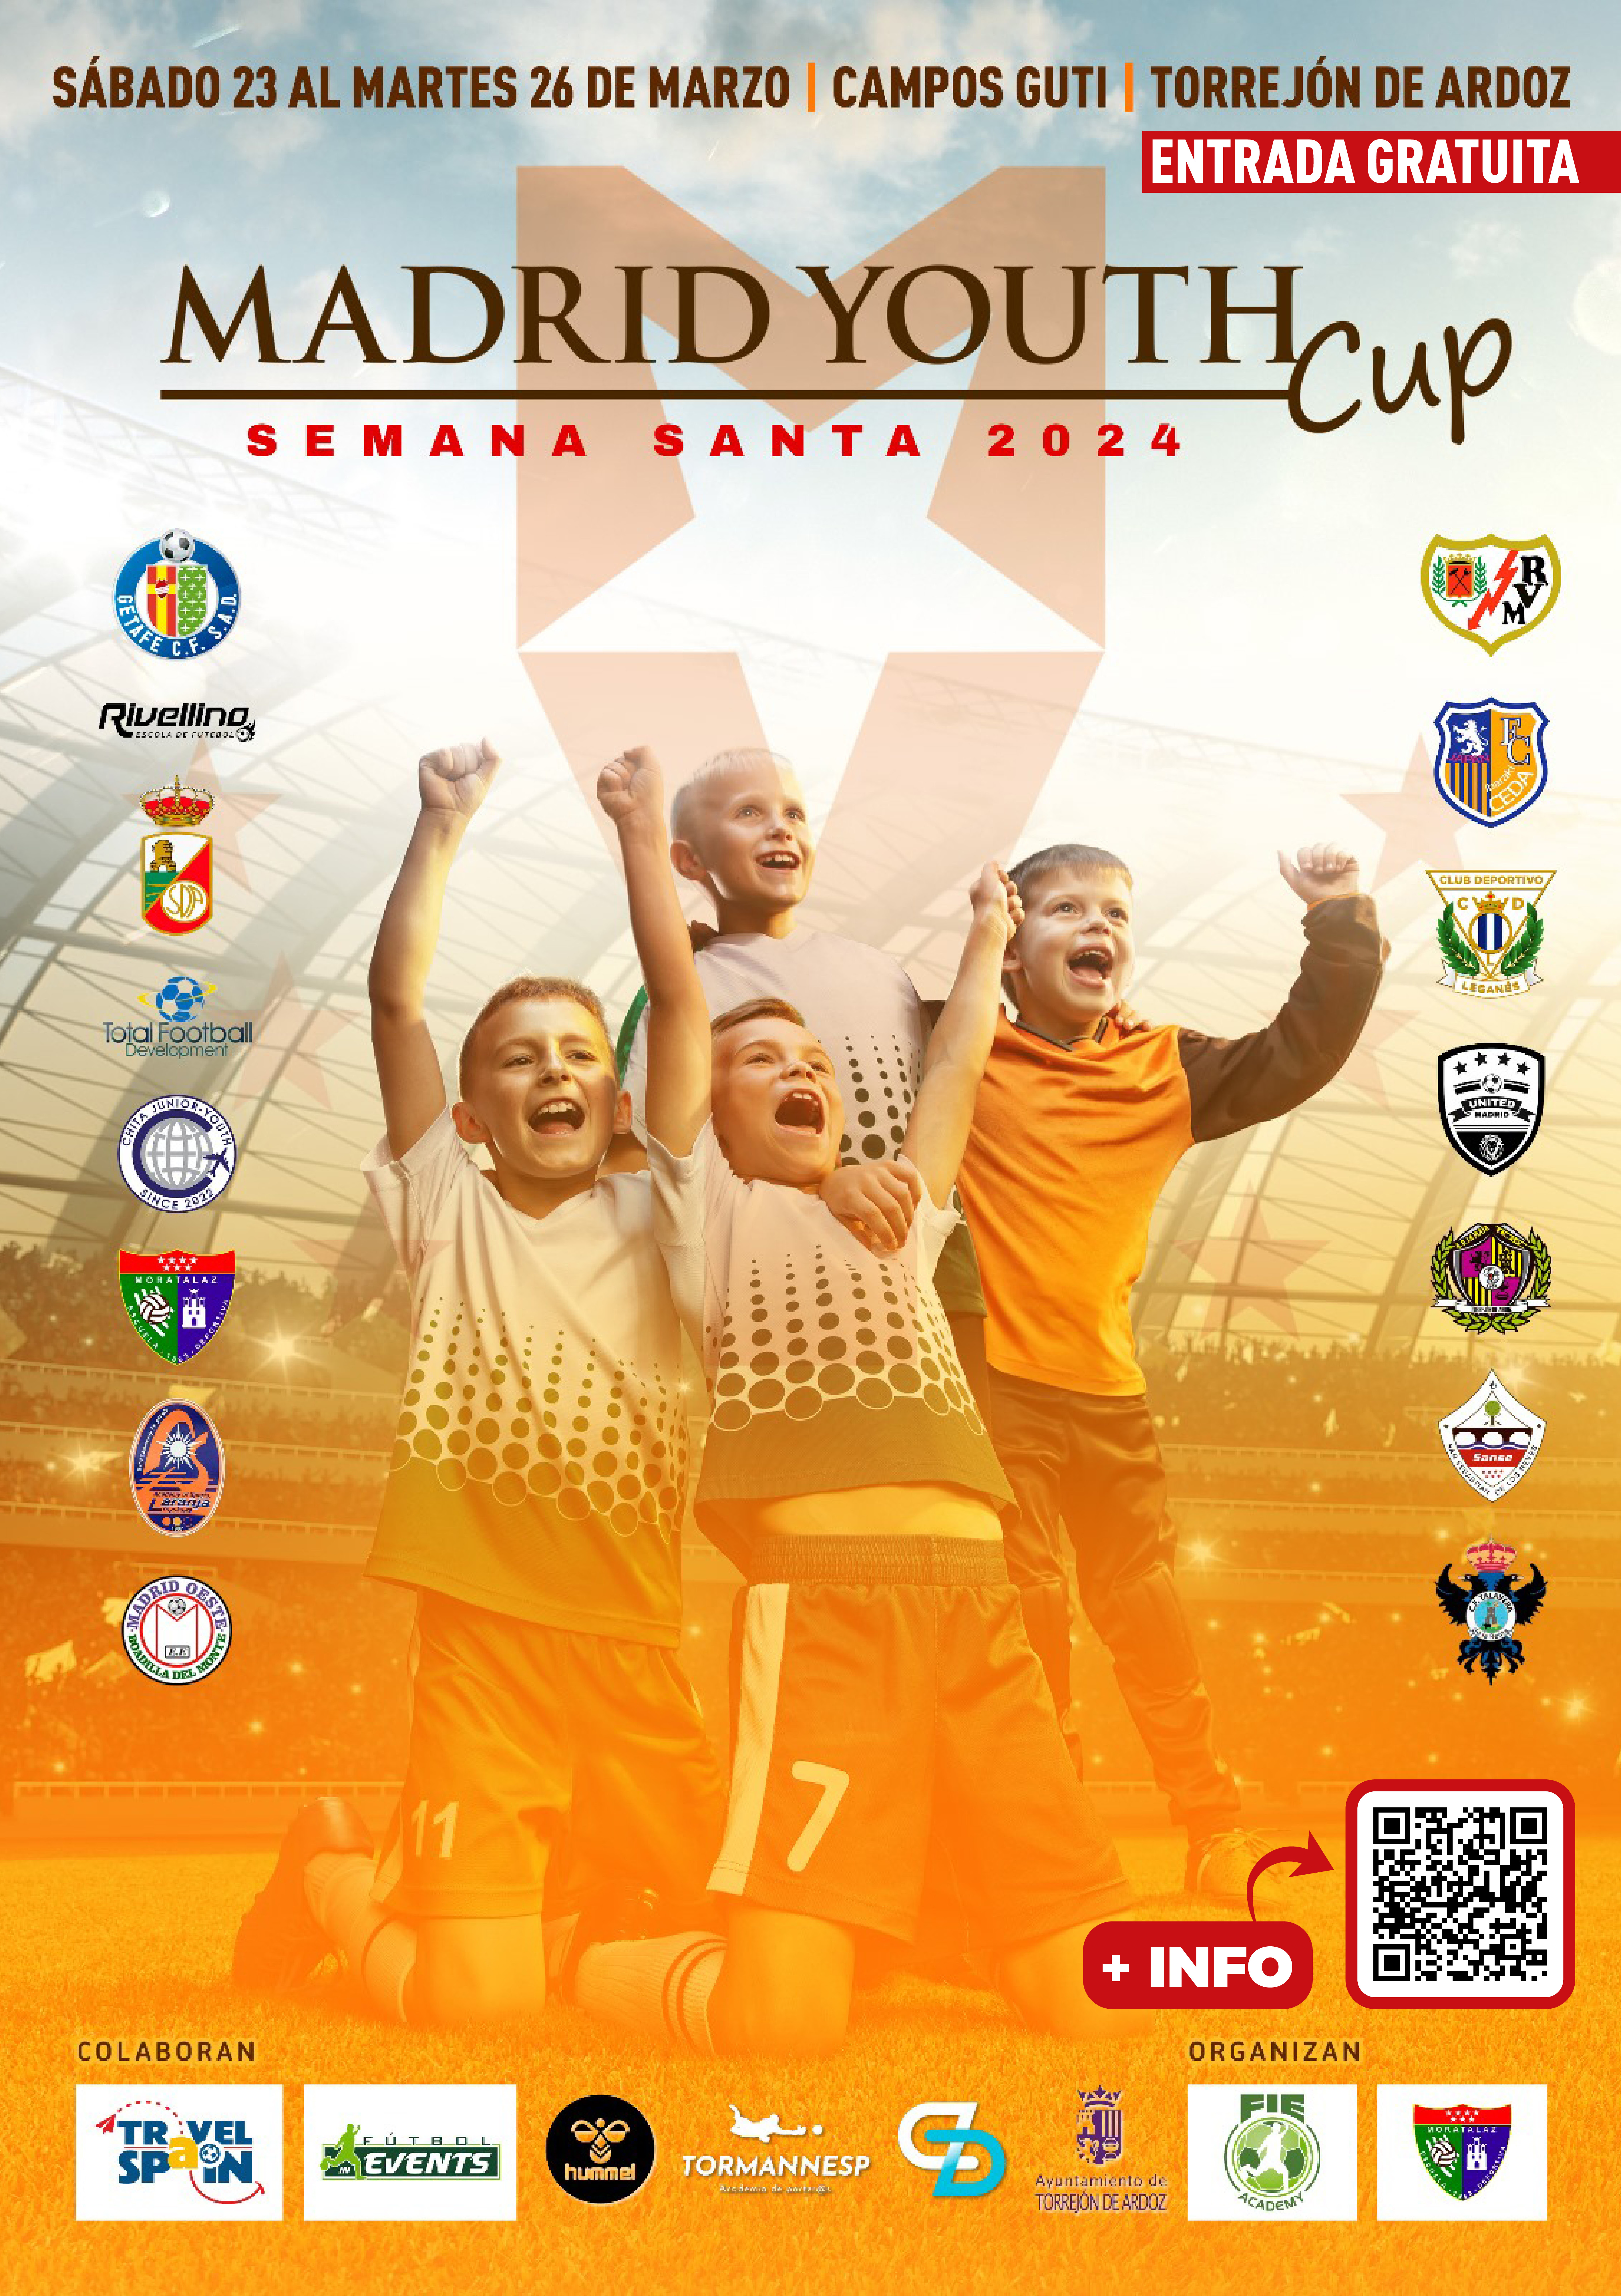 Youth Cup fútbol